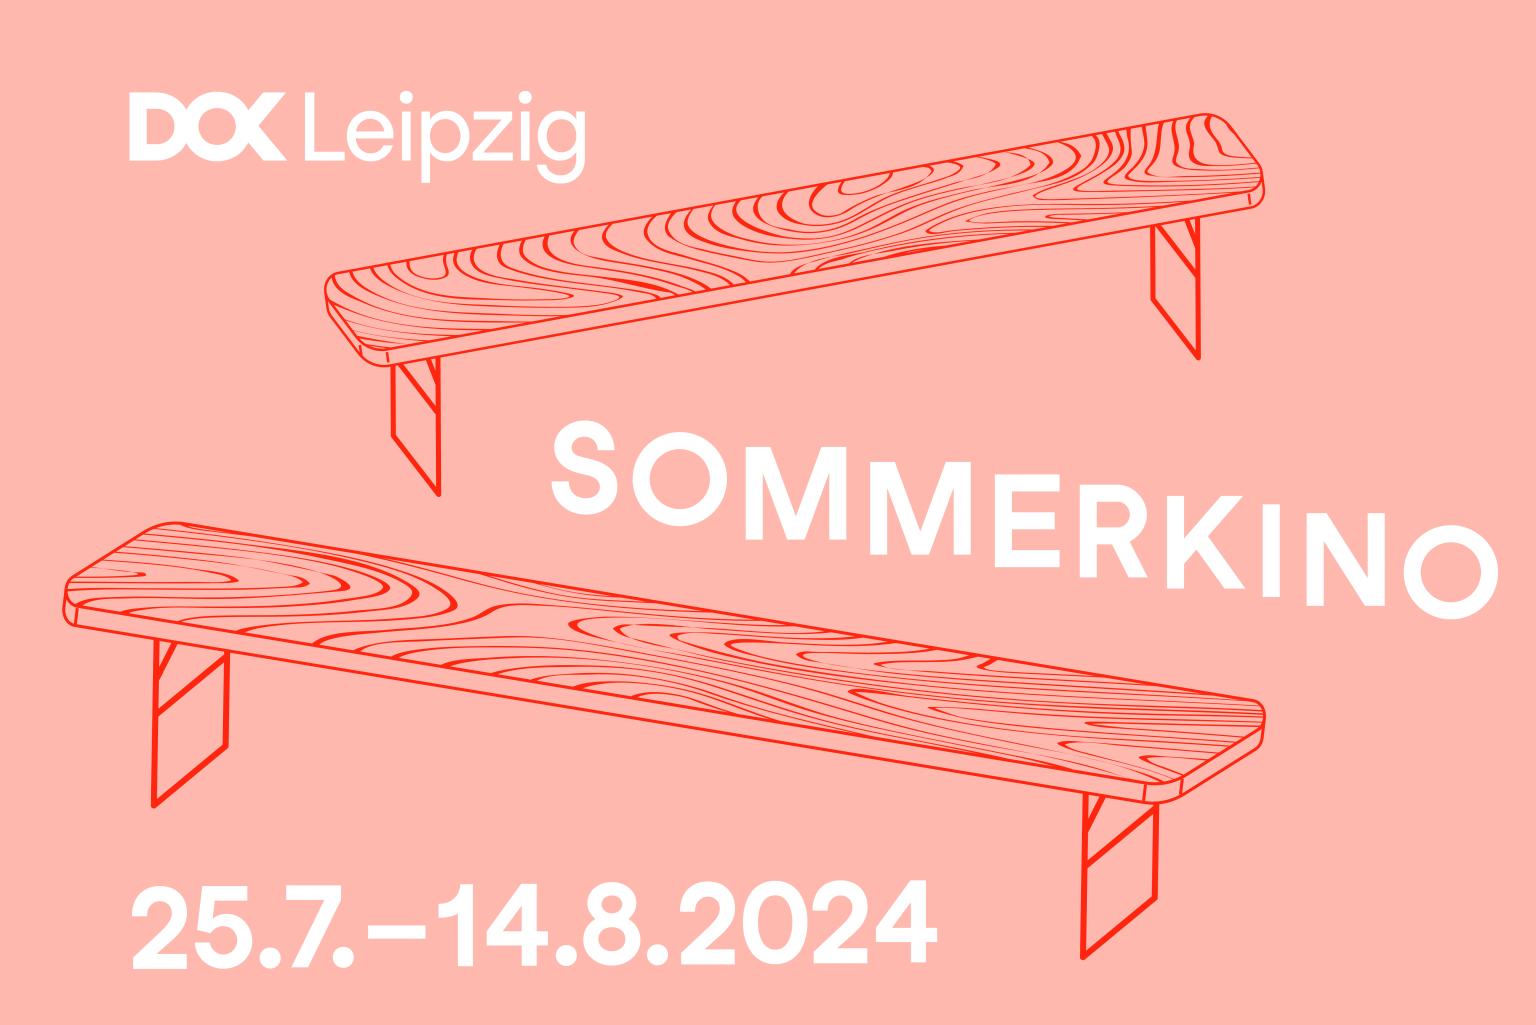 Grafik: two wood-made benches are combined with the words "DOK Leipzig Sommerkino, 25.7.-14.8.2024"